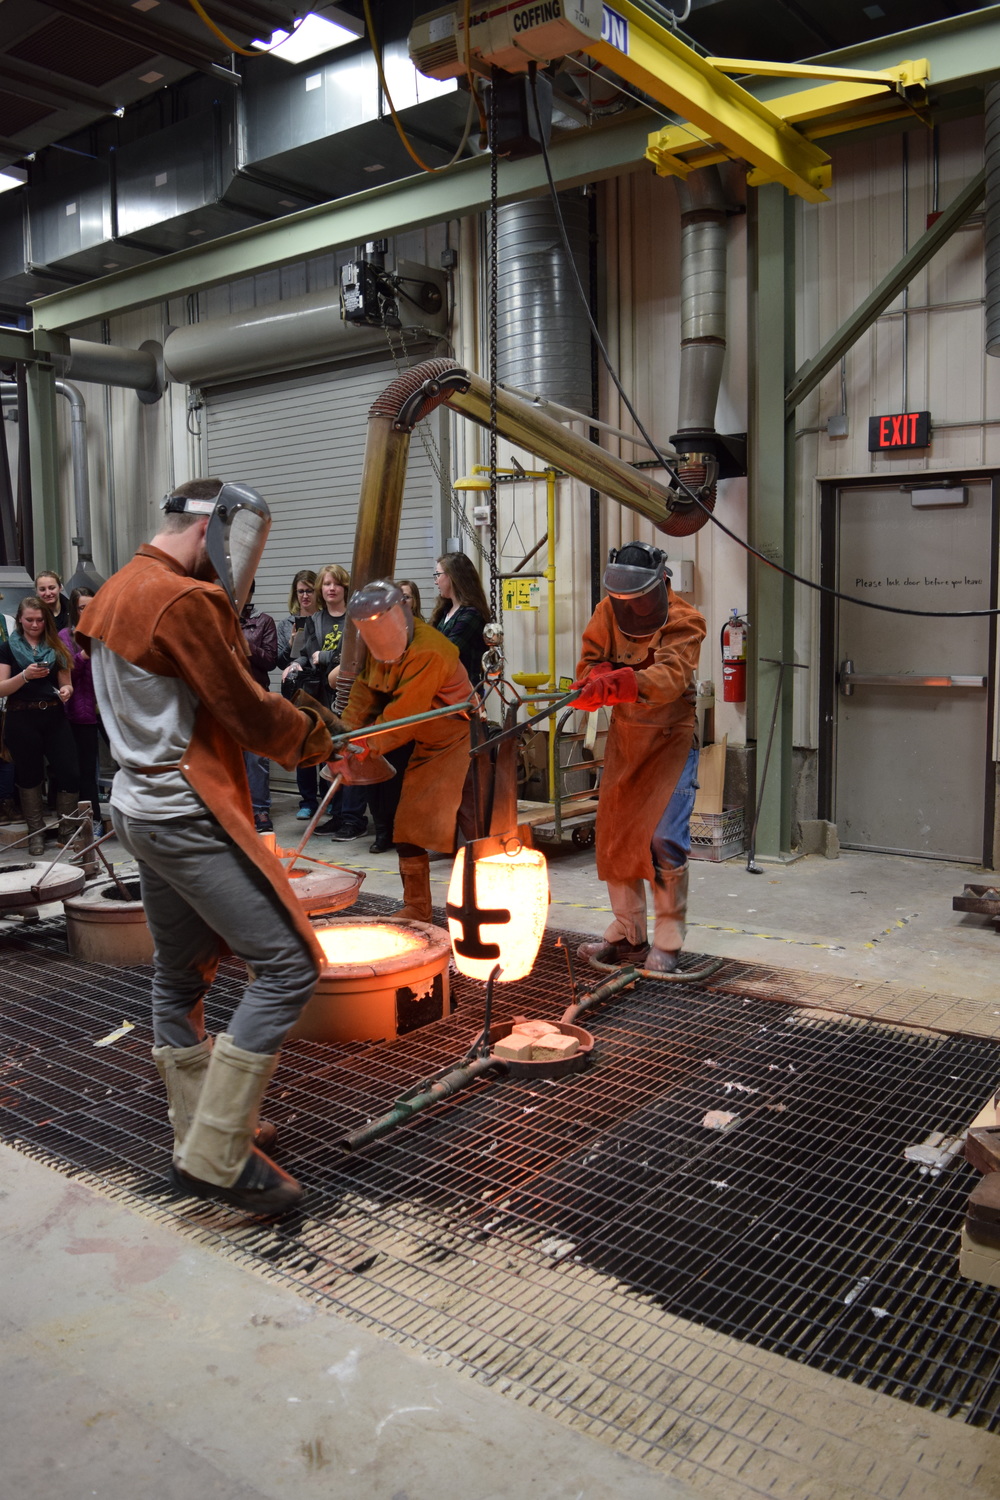  Bringing the bronze crucible out of the forge. A group from a local high school was observing.   